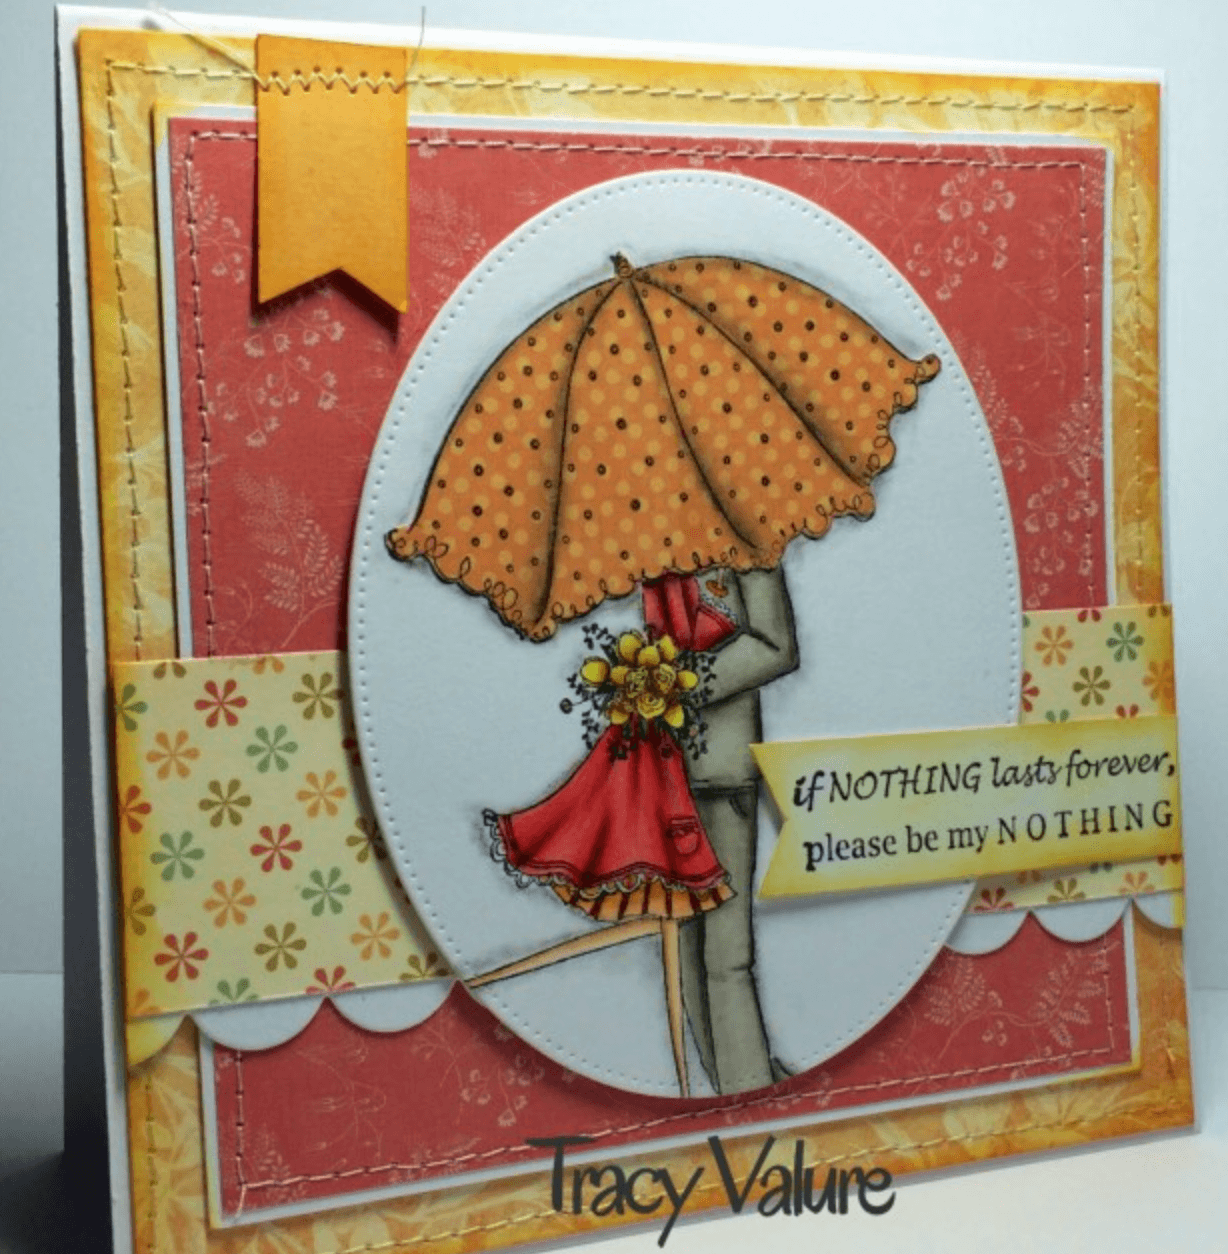 Stamping Bella - Rubber Stamp - Uptown Girls - Emily And Ryan Under The Umbrella - Messy Papercrafts